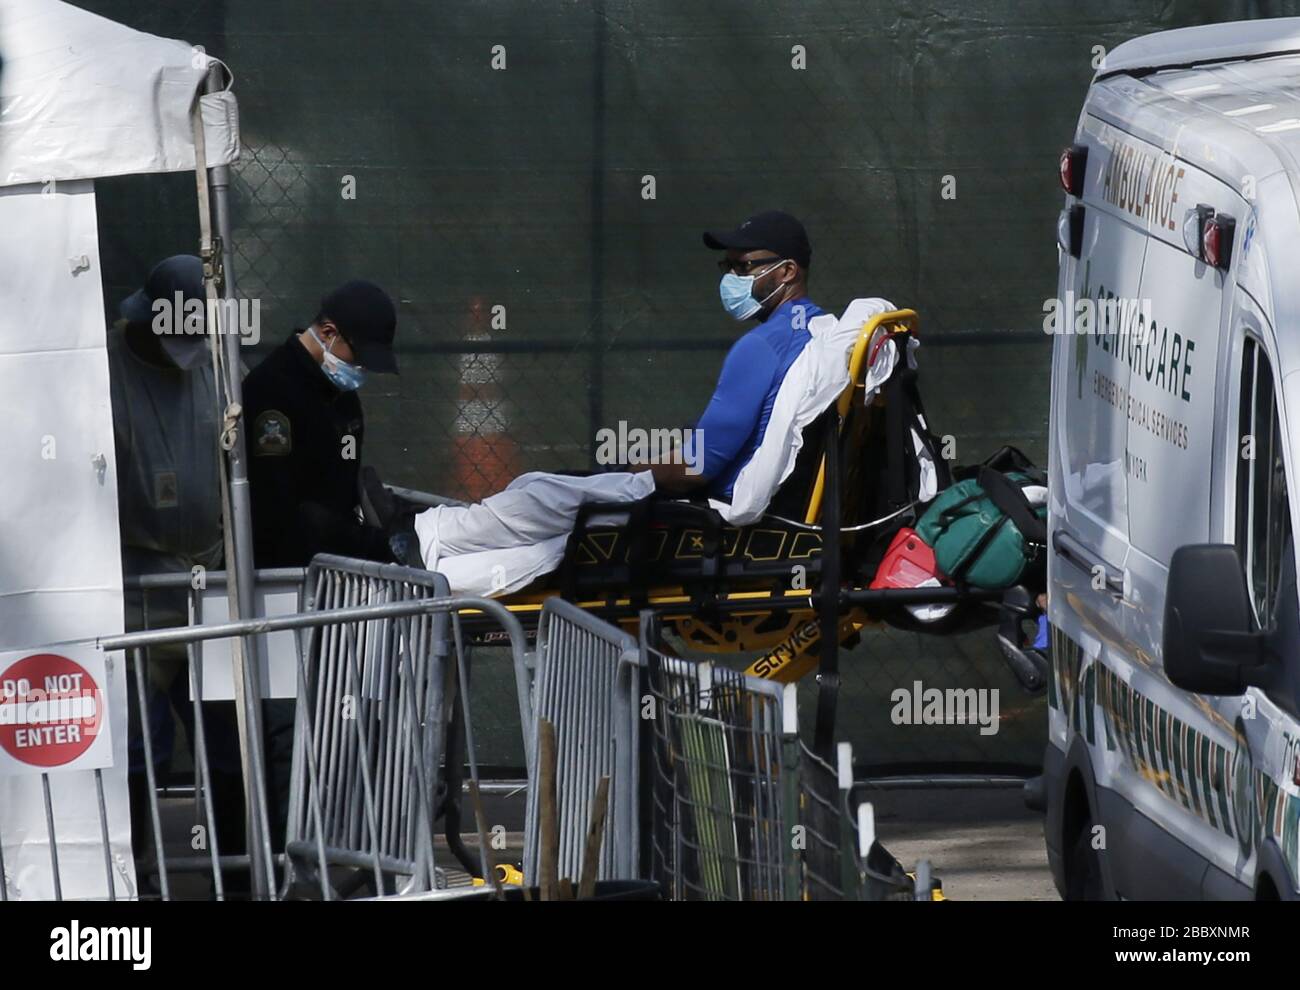 New York, United States. 01st Apr, 2020. A sick patient arrives in a stretcher by ambulance in Central Park in New York City on Wednesday, April 1, 2020. The tents are located along the East Meadow near Mt. Sinai Hospital and are being used as an overflow medical center. They were erected in 48 hours by the non-profit charity Samaritan's Purse. Photo by John Angelillo/UPI Credit: UPI/Alamy Live News Stock Photo